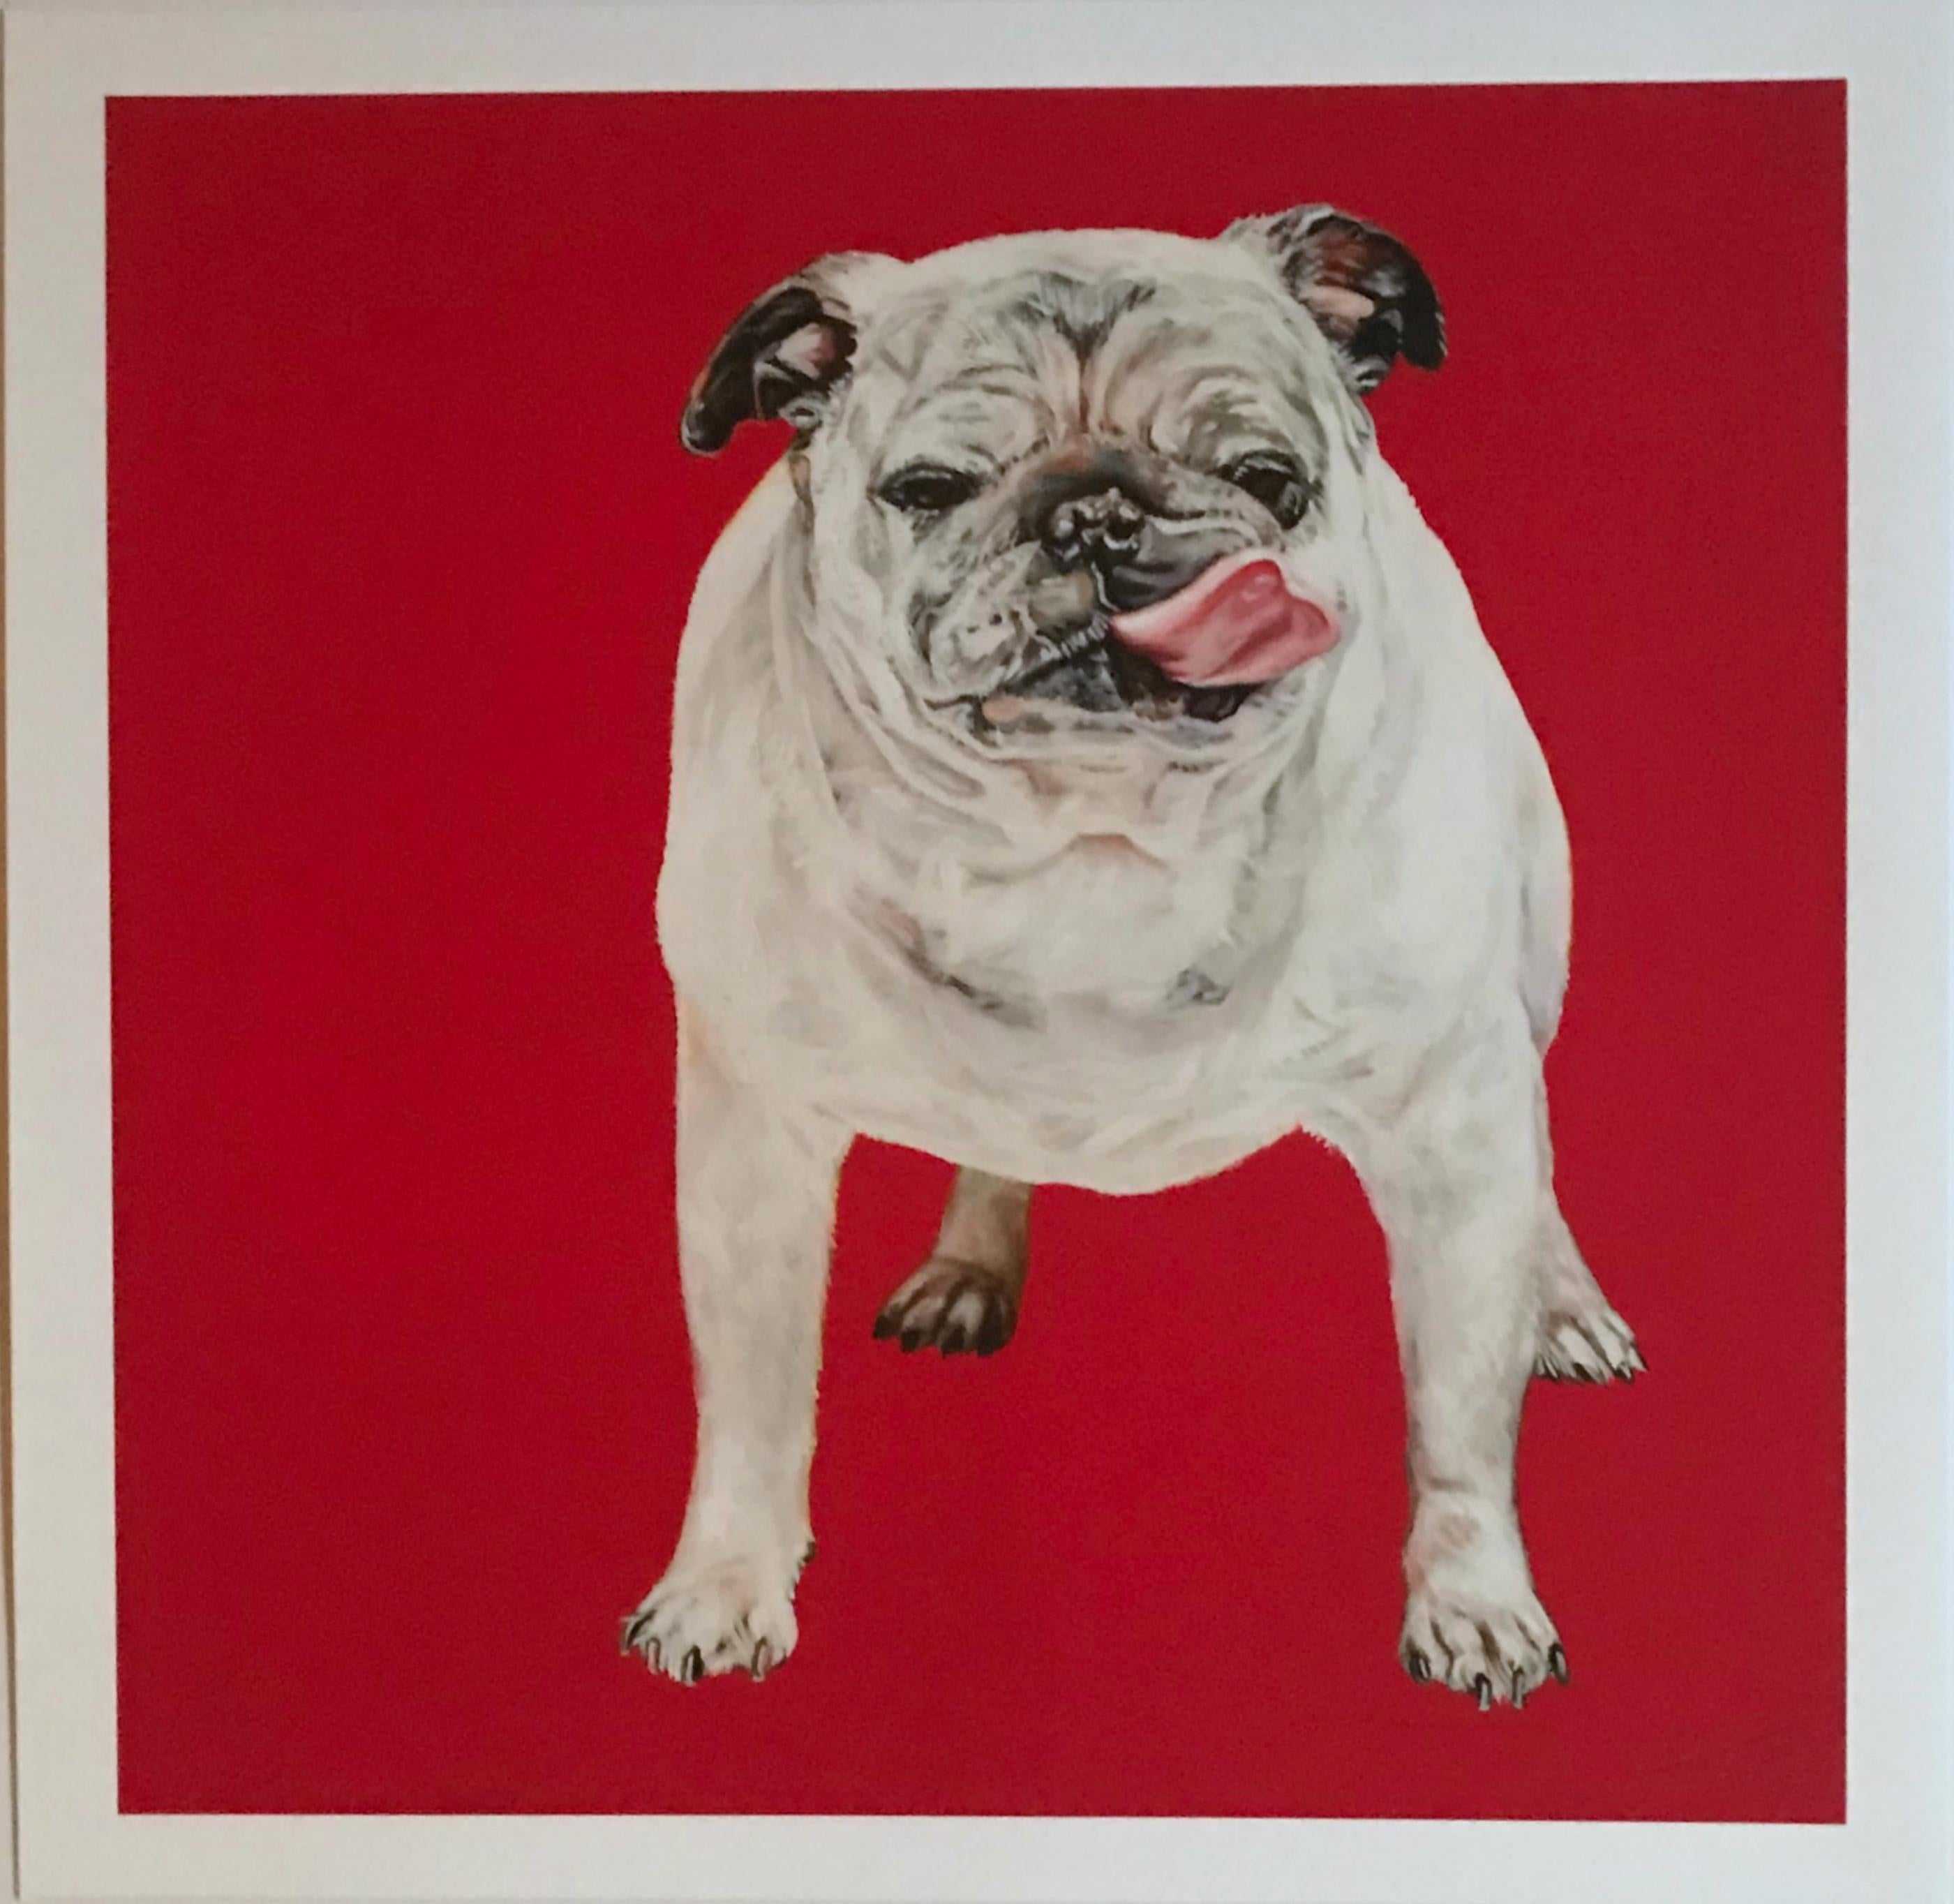  Blu on Red, limited edition print by world renowned female portrait artist  - Print by Brenda Zlamany